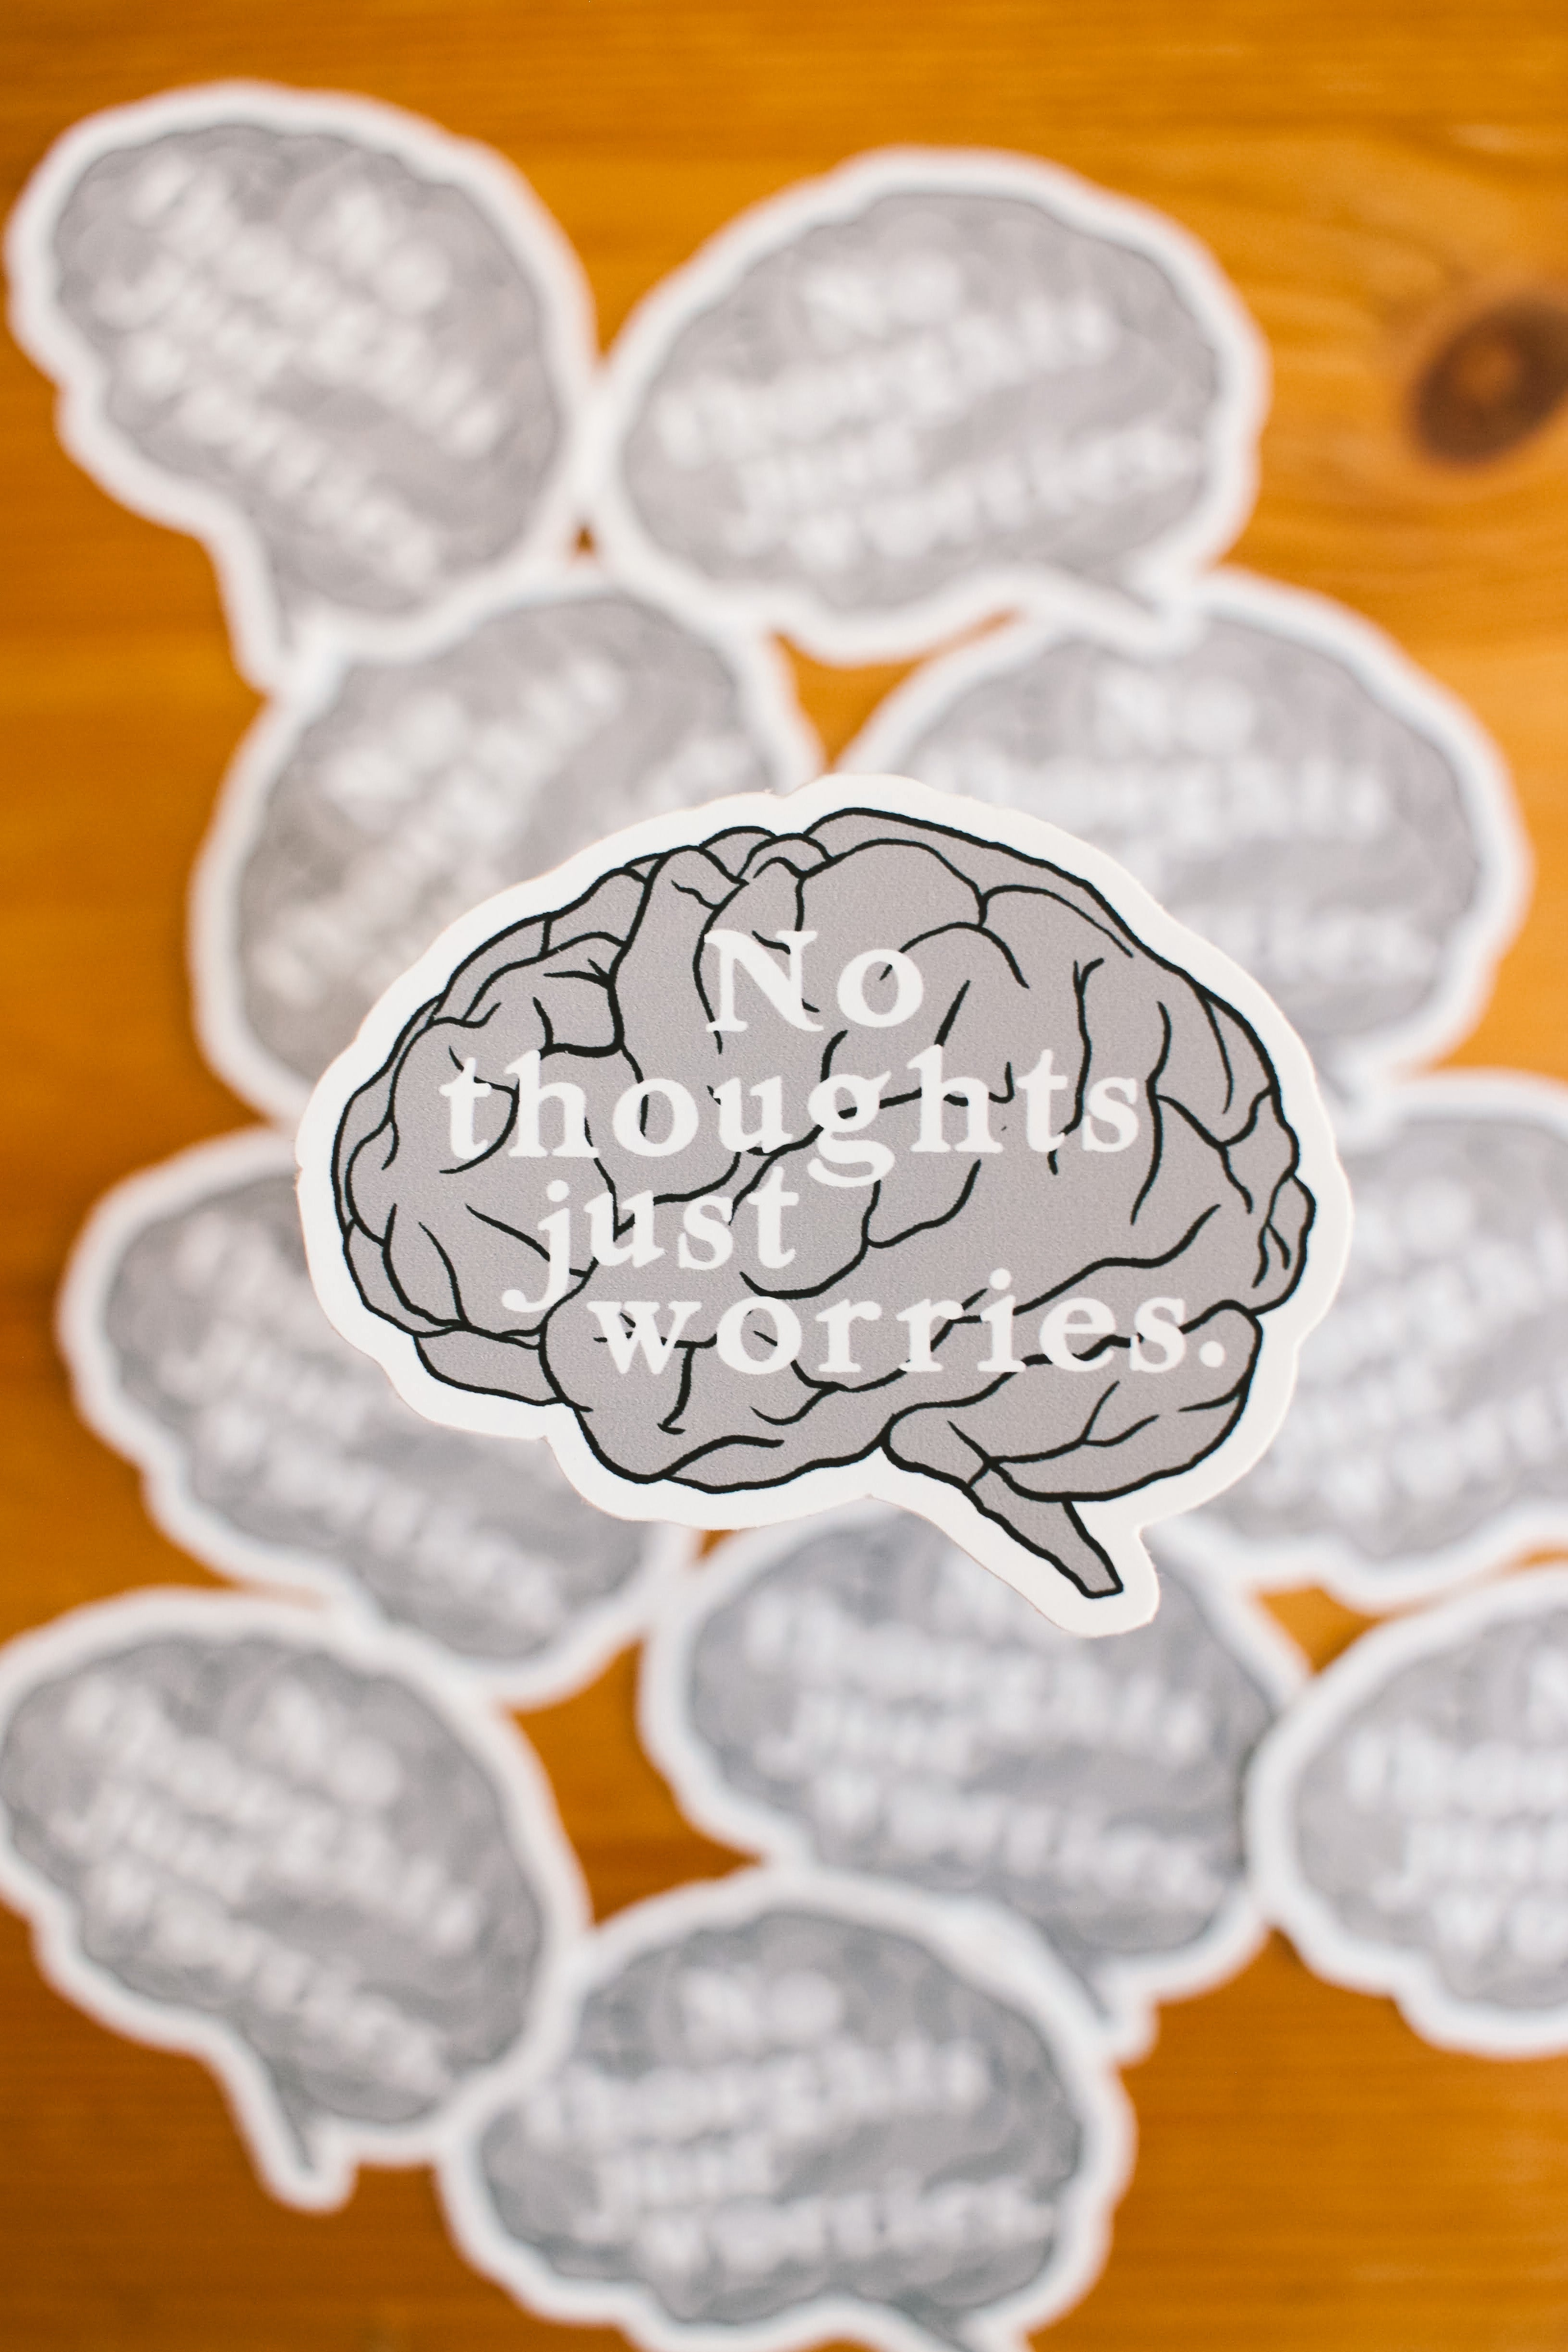 No Thoughts Just Worries - Sticker